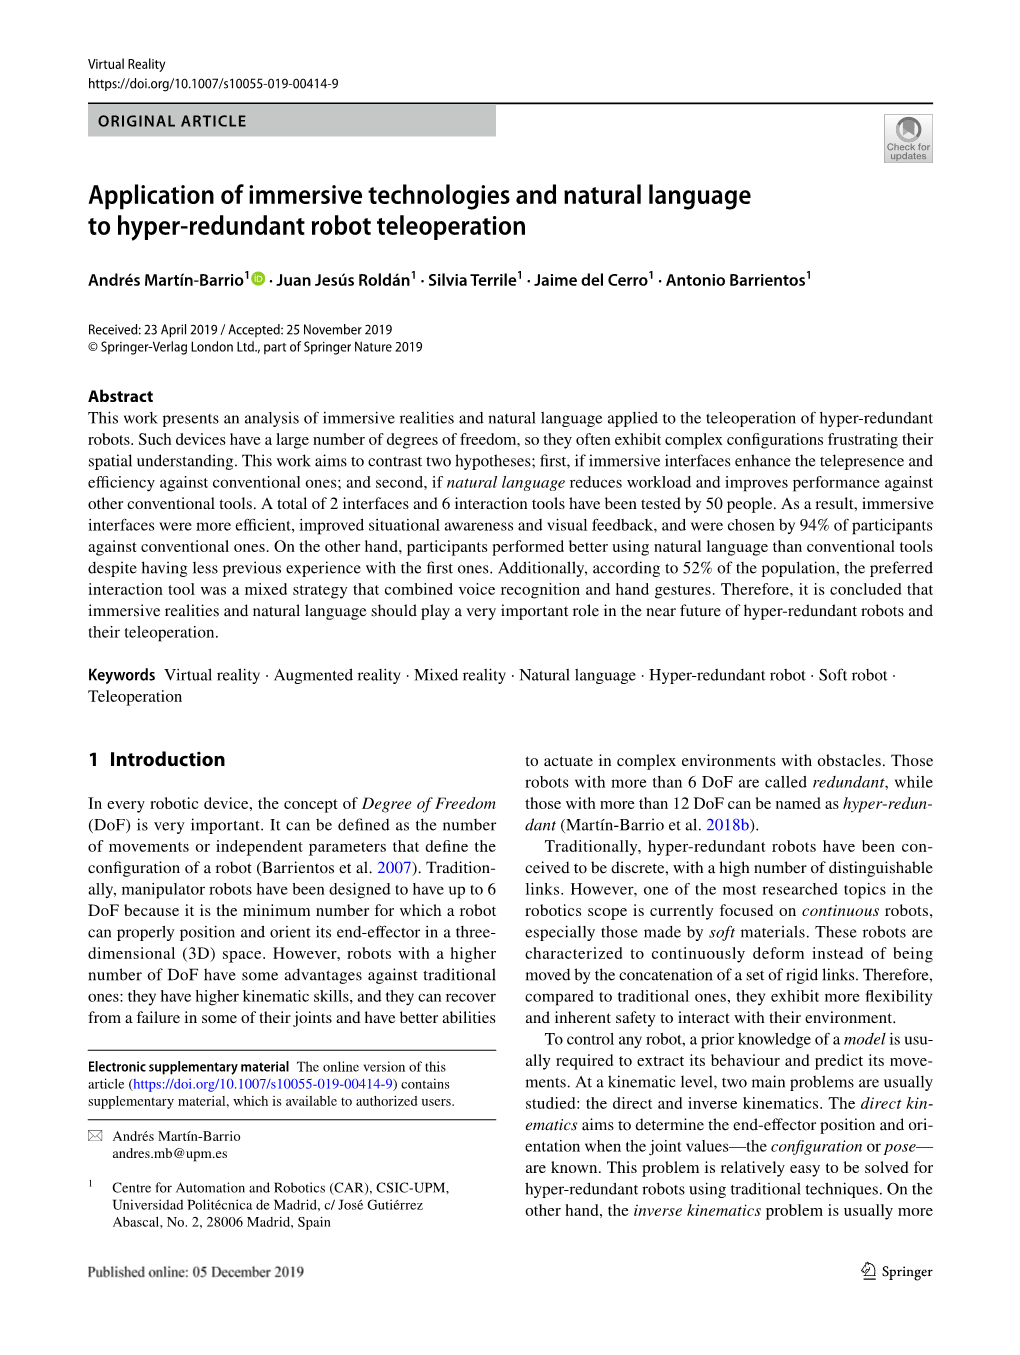 Application of Immersive Technologies and Natural Language to Hyper-Redundant Robot Teleoperation